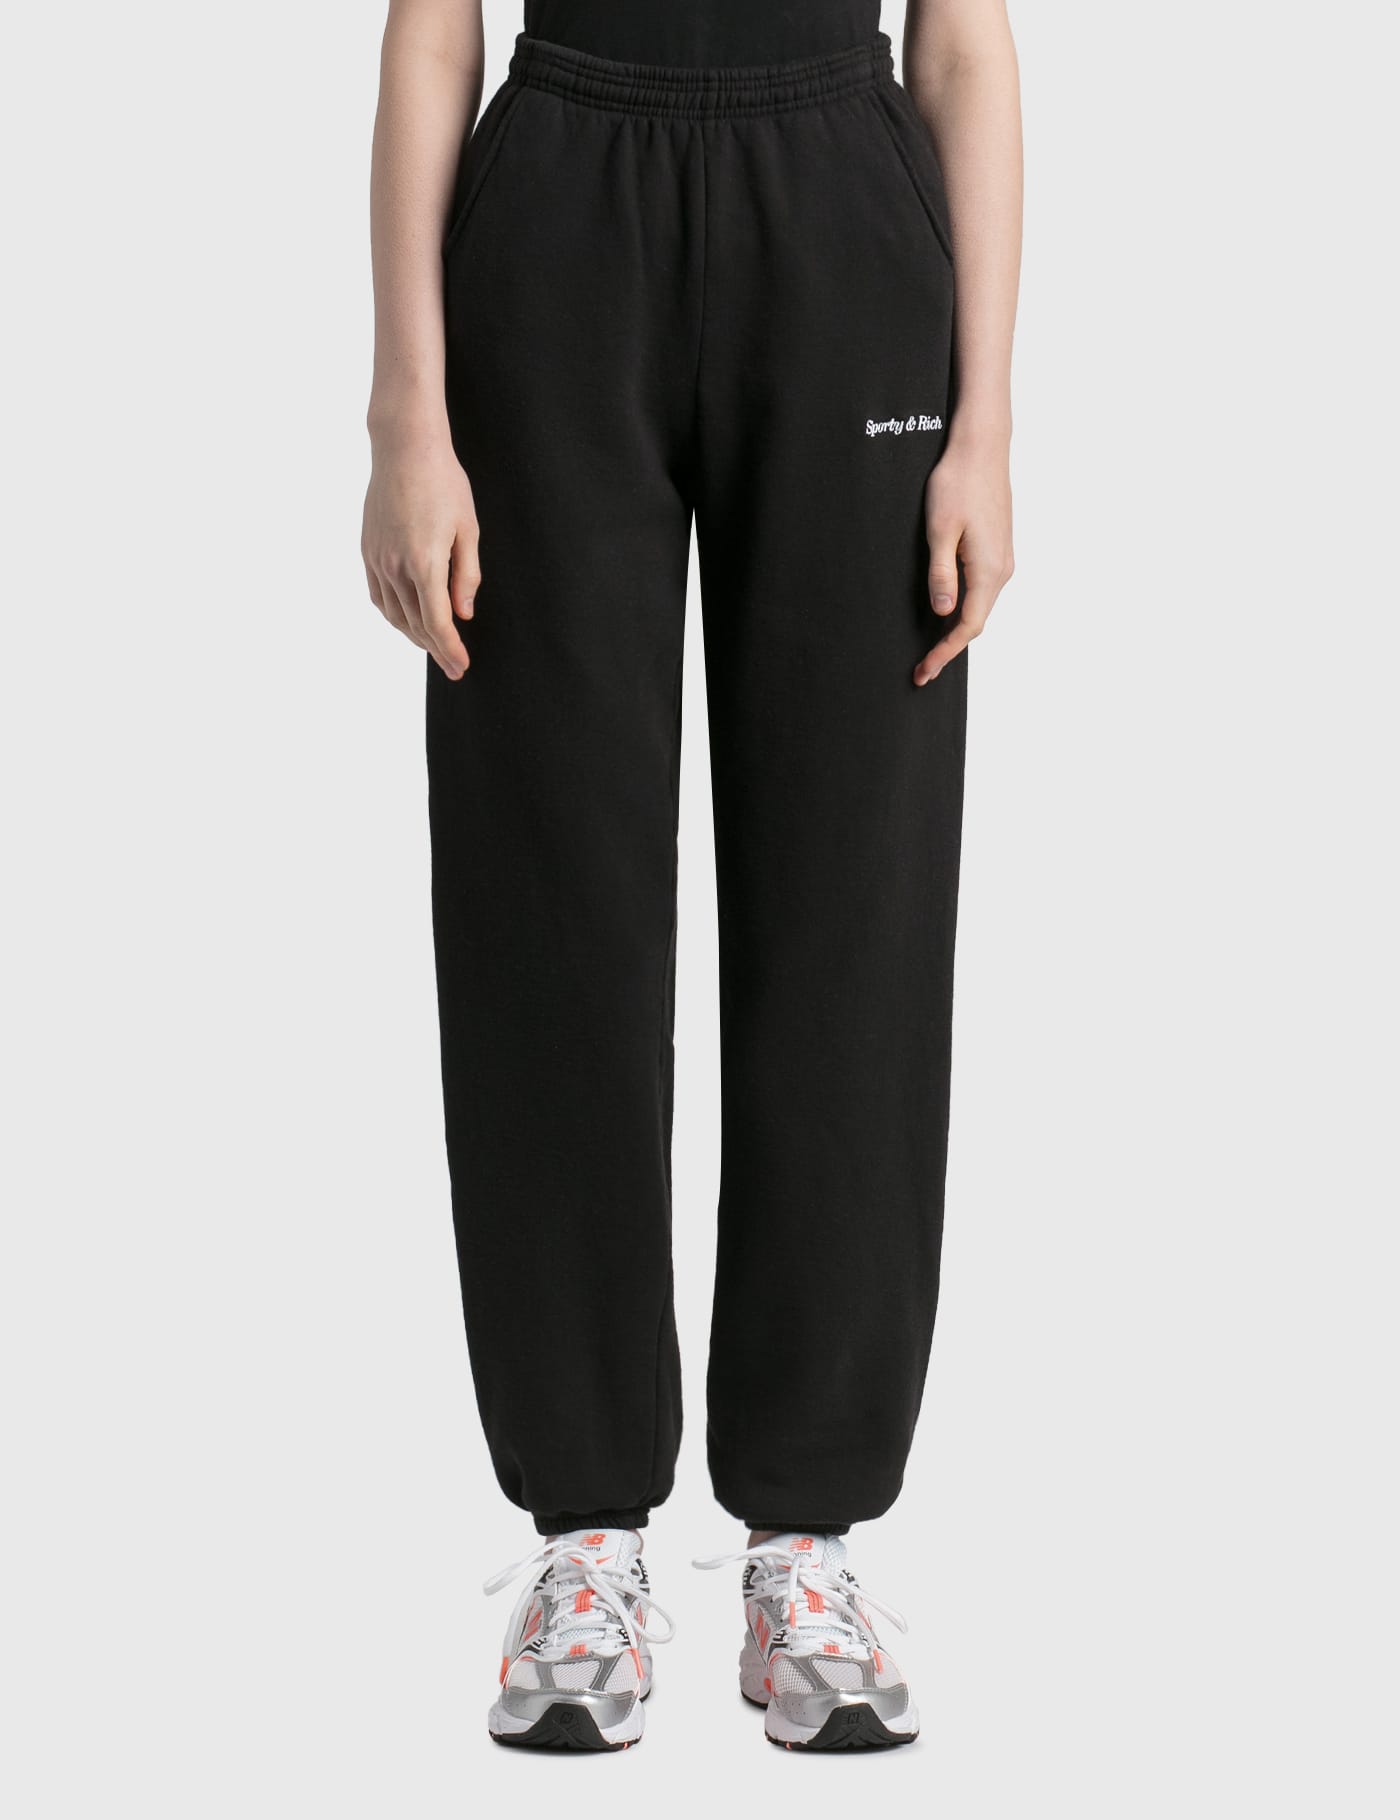 Sporty & Rich - Classic Logo Sweatpants | HBX - Globally Curated 